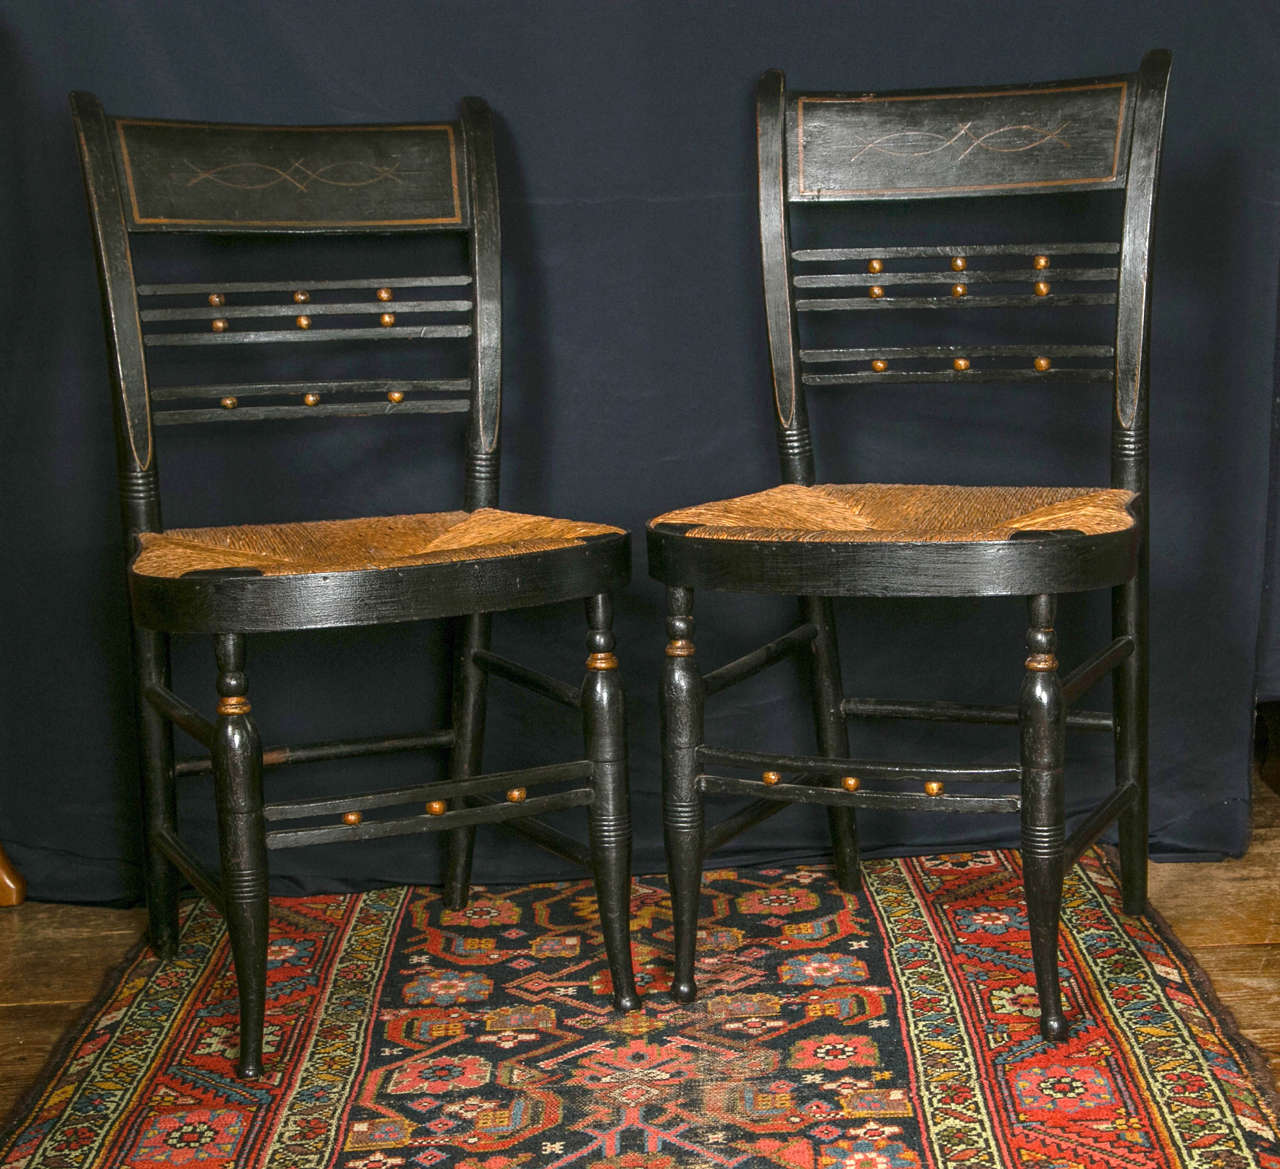 Black painted with gold accents, these rush-seated chairs aspire to grander environs, yet their humble stature will always foil a much wished for trip to the parlor. A late 19th century version of hall chair, they were meant to weather the drafts of